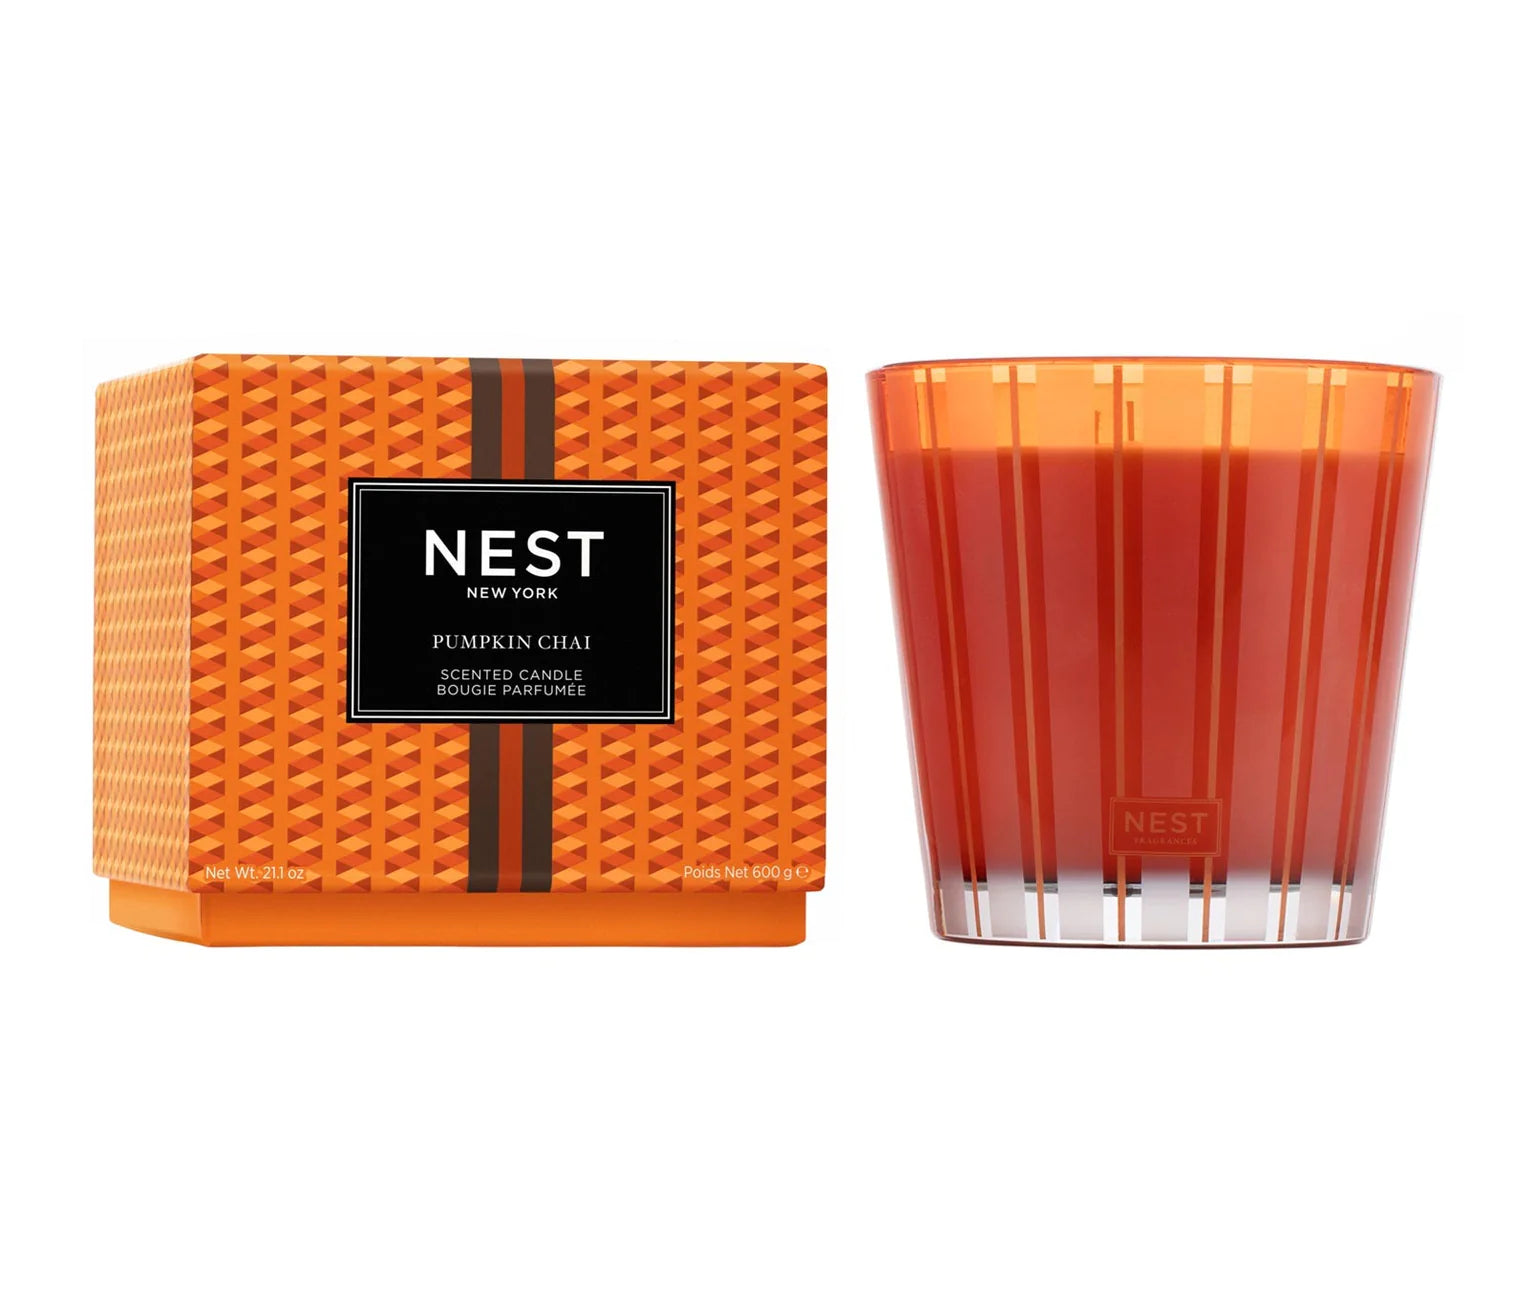 NEST 3 Wick 21.1oz Candle